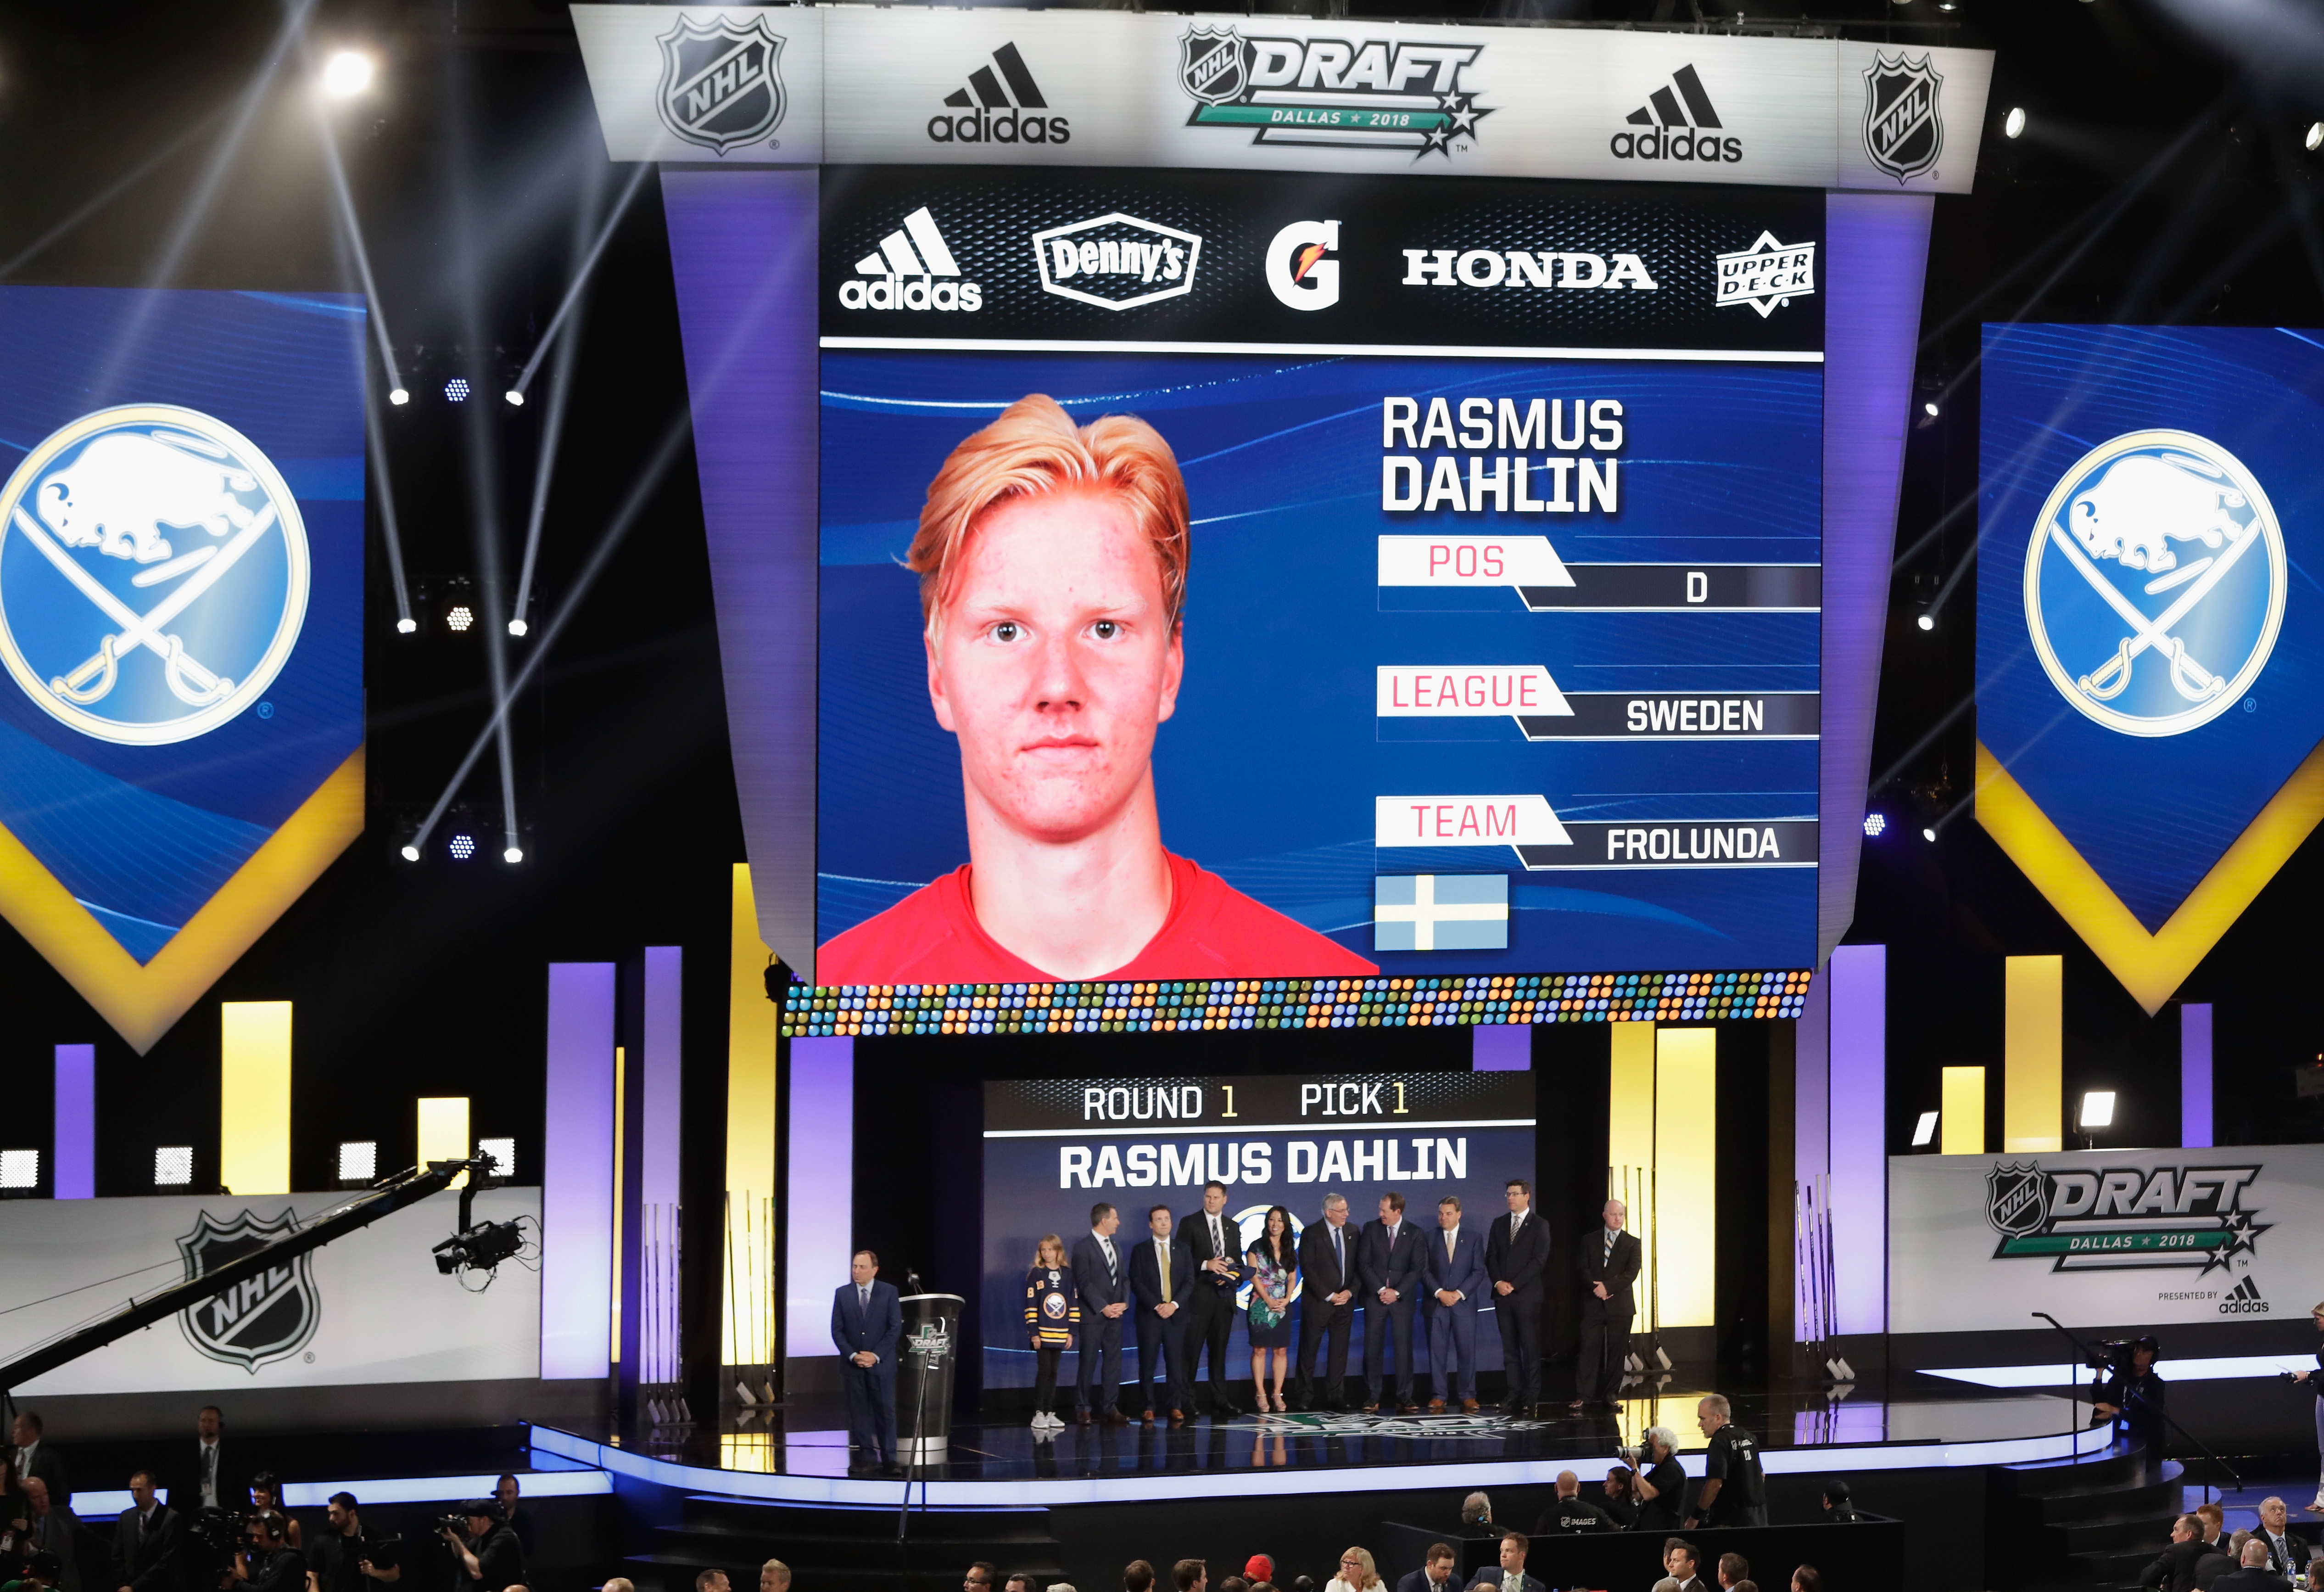 A general view is seen of the stage after Rasmus Dahlin was selected first overall by the Buffalo Sabres during the first round of the 2018 NHL Draft at American Airlines Center on June 22, 2018 in Dallas, Texas.